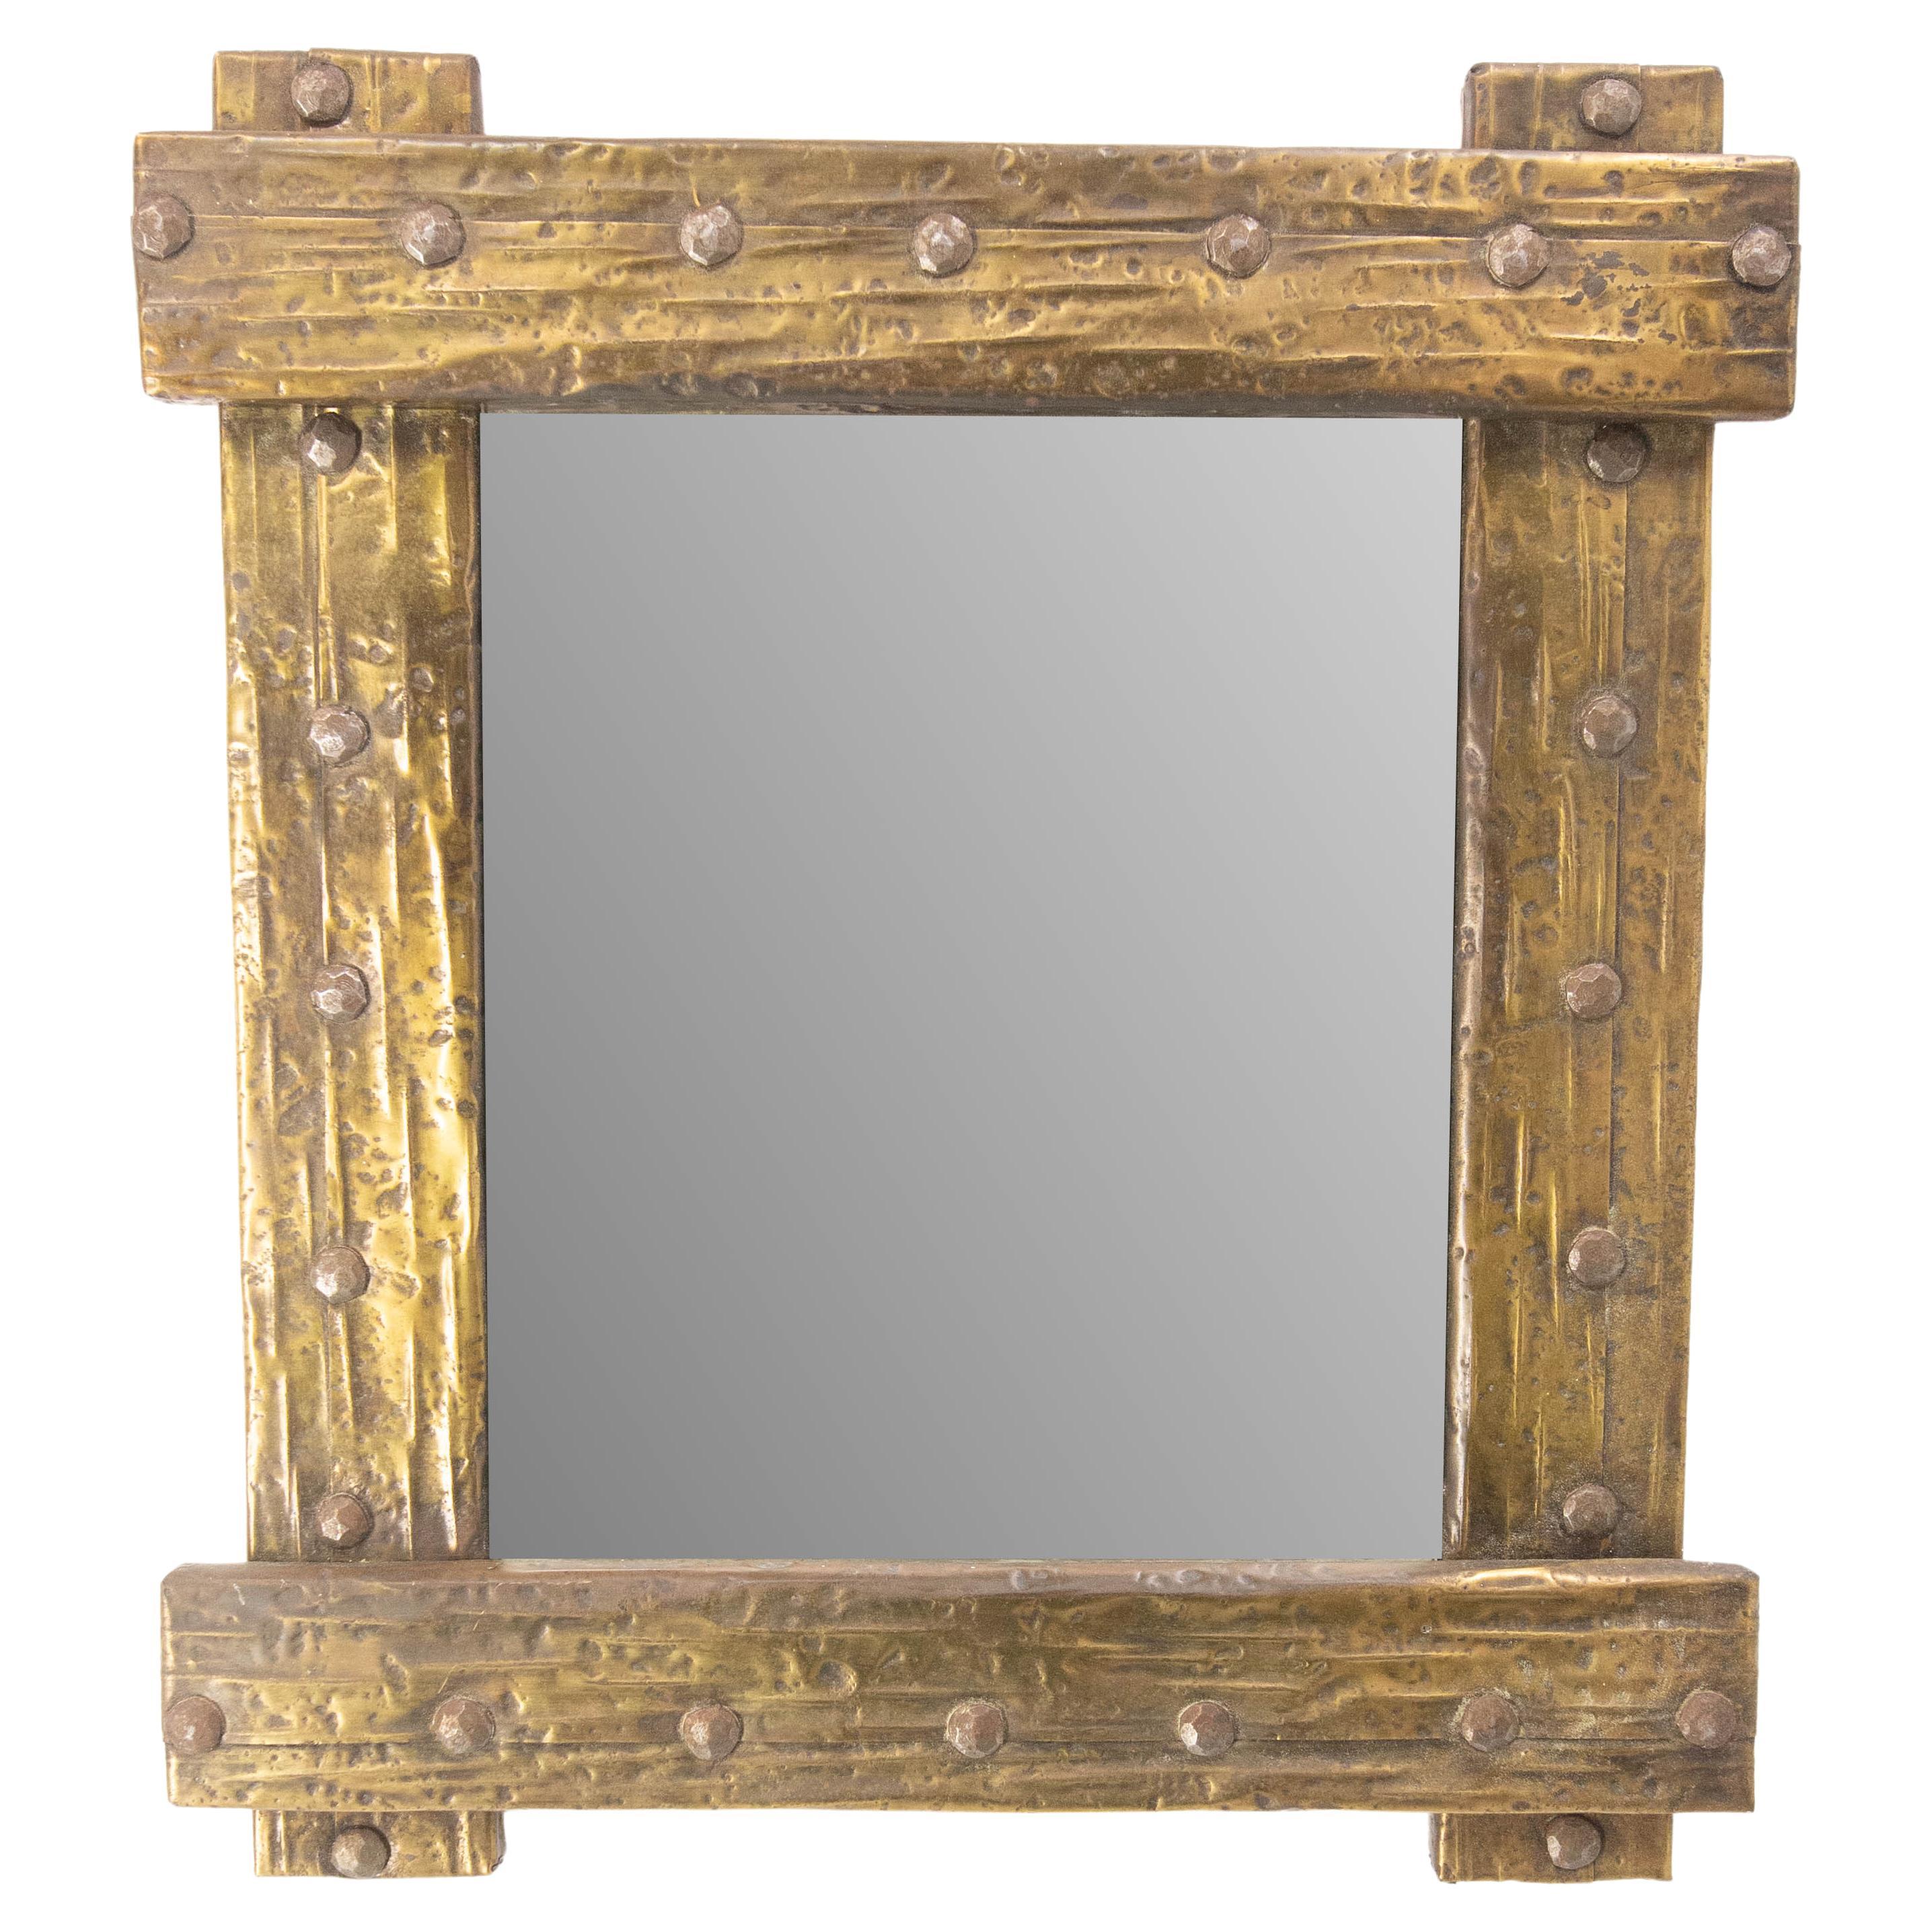 Midcentury spanish mirror made circa 1960.
The frame is made of laminated sheets of brass  worked to resemble rustic wood planks.
Wrought iron hammered stoods.
Good vintage condition.

Shipping:
4.5 / 43.5 / 50 cm 3.5 kg